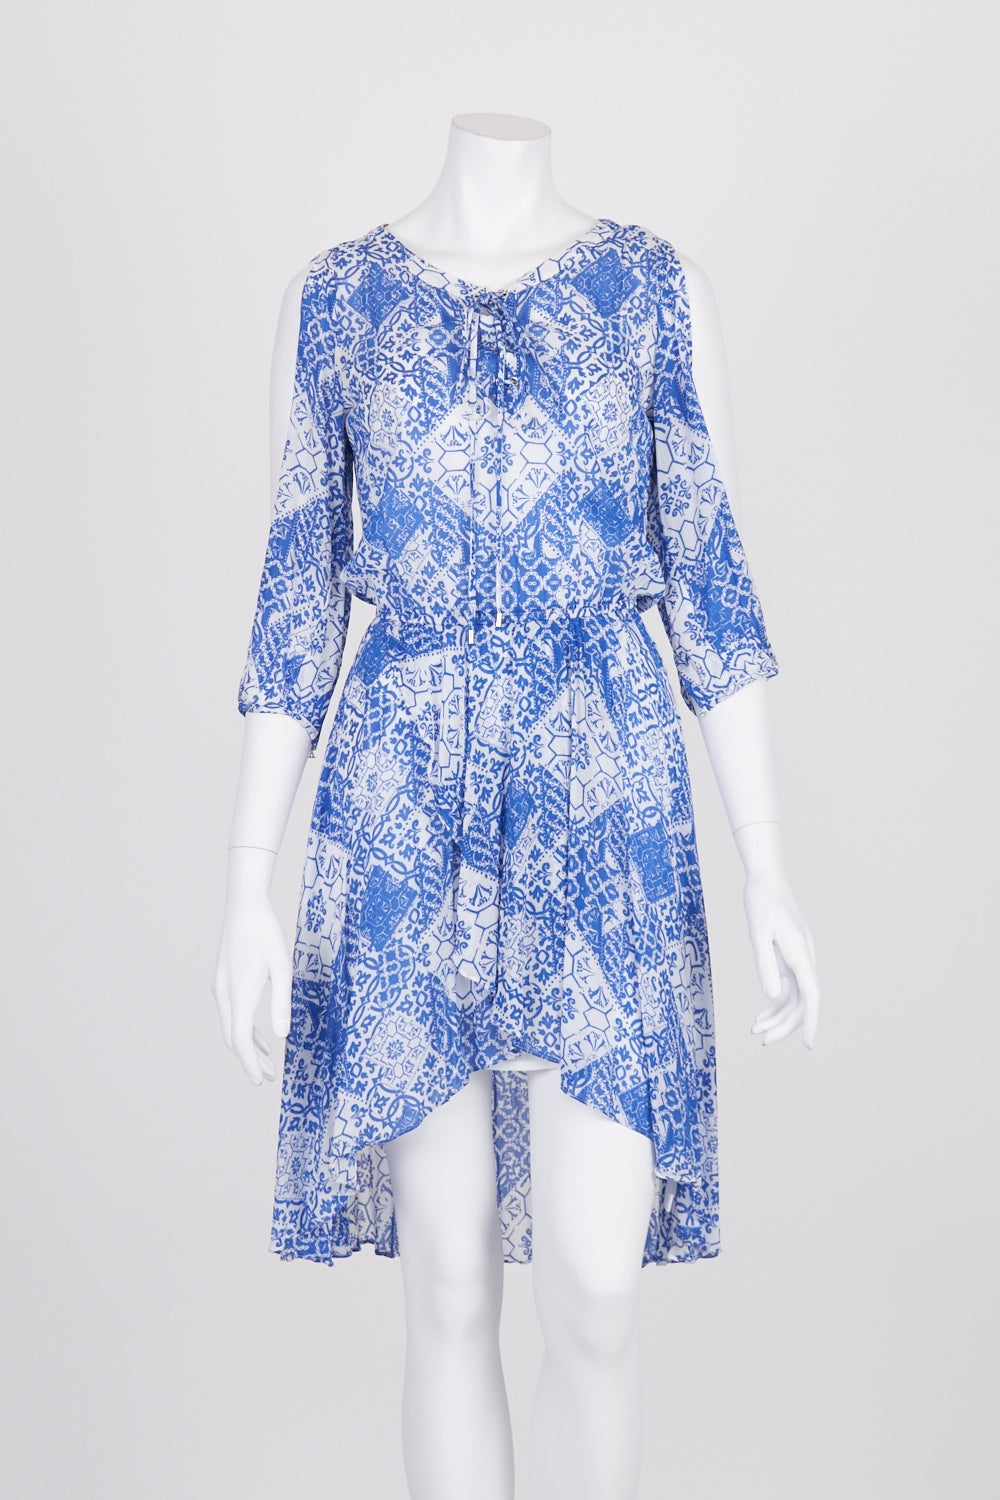 Witchery Blue And White Patterned Dress 4